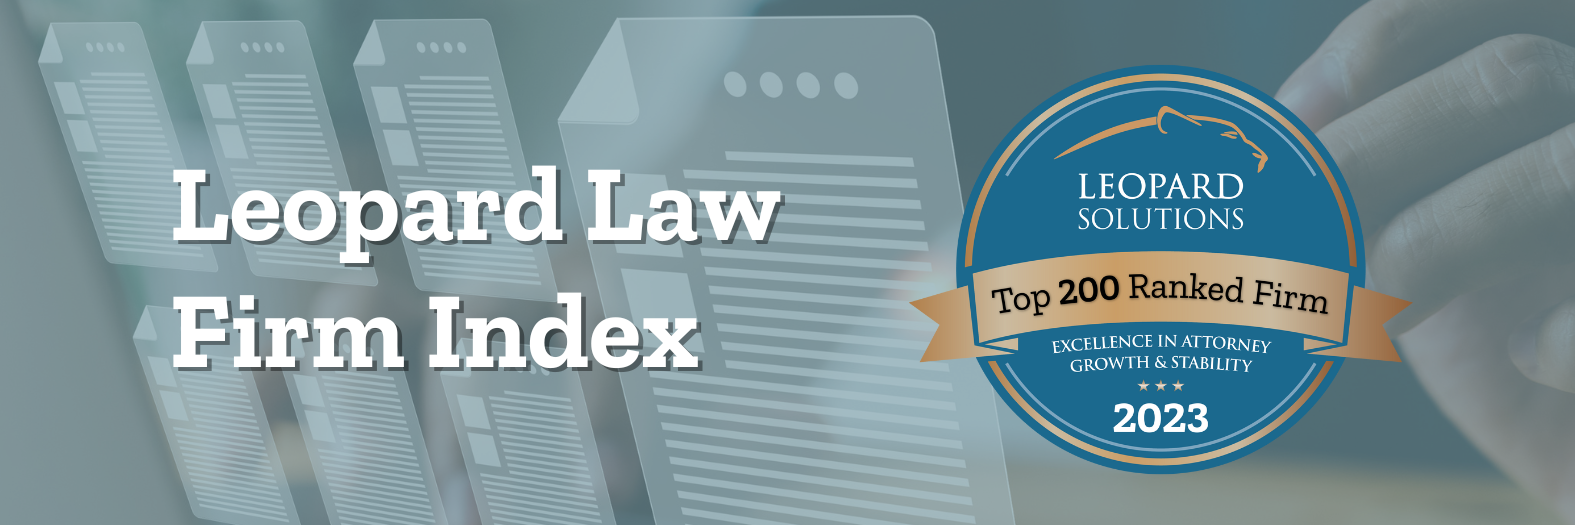 Leopard Law Firm Index – Top 250 Law Firms